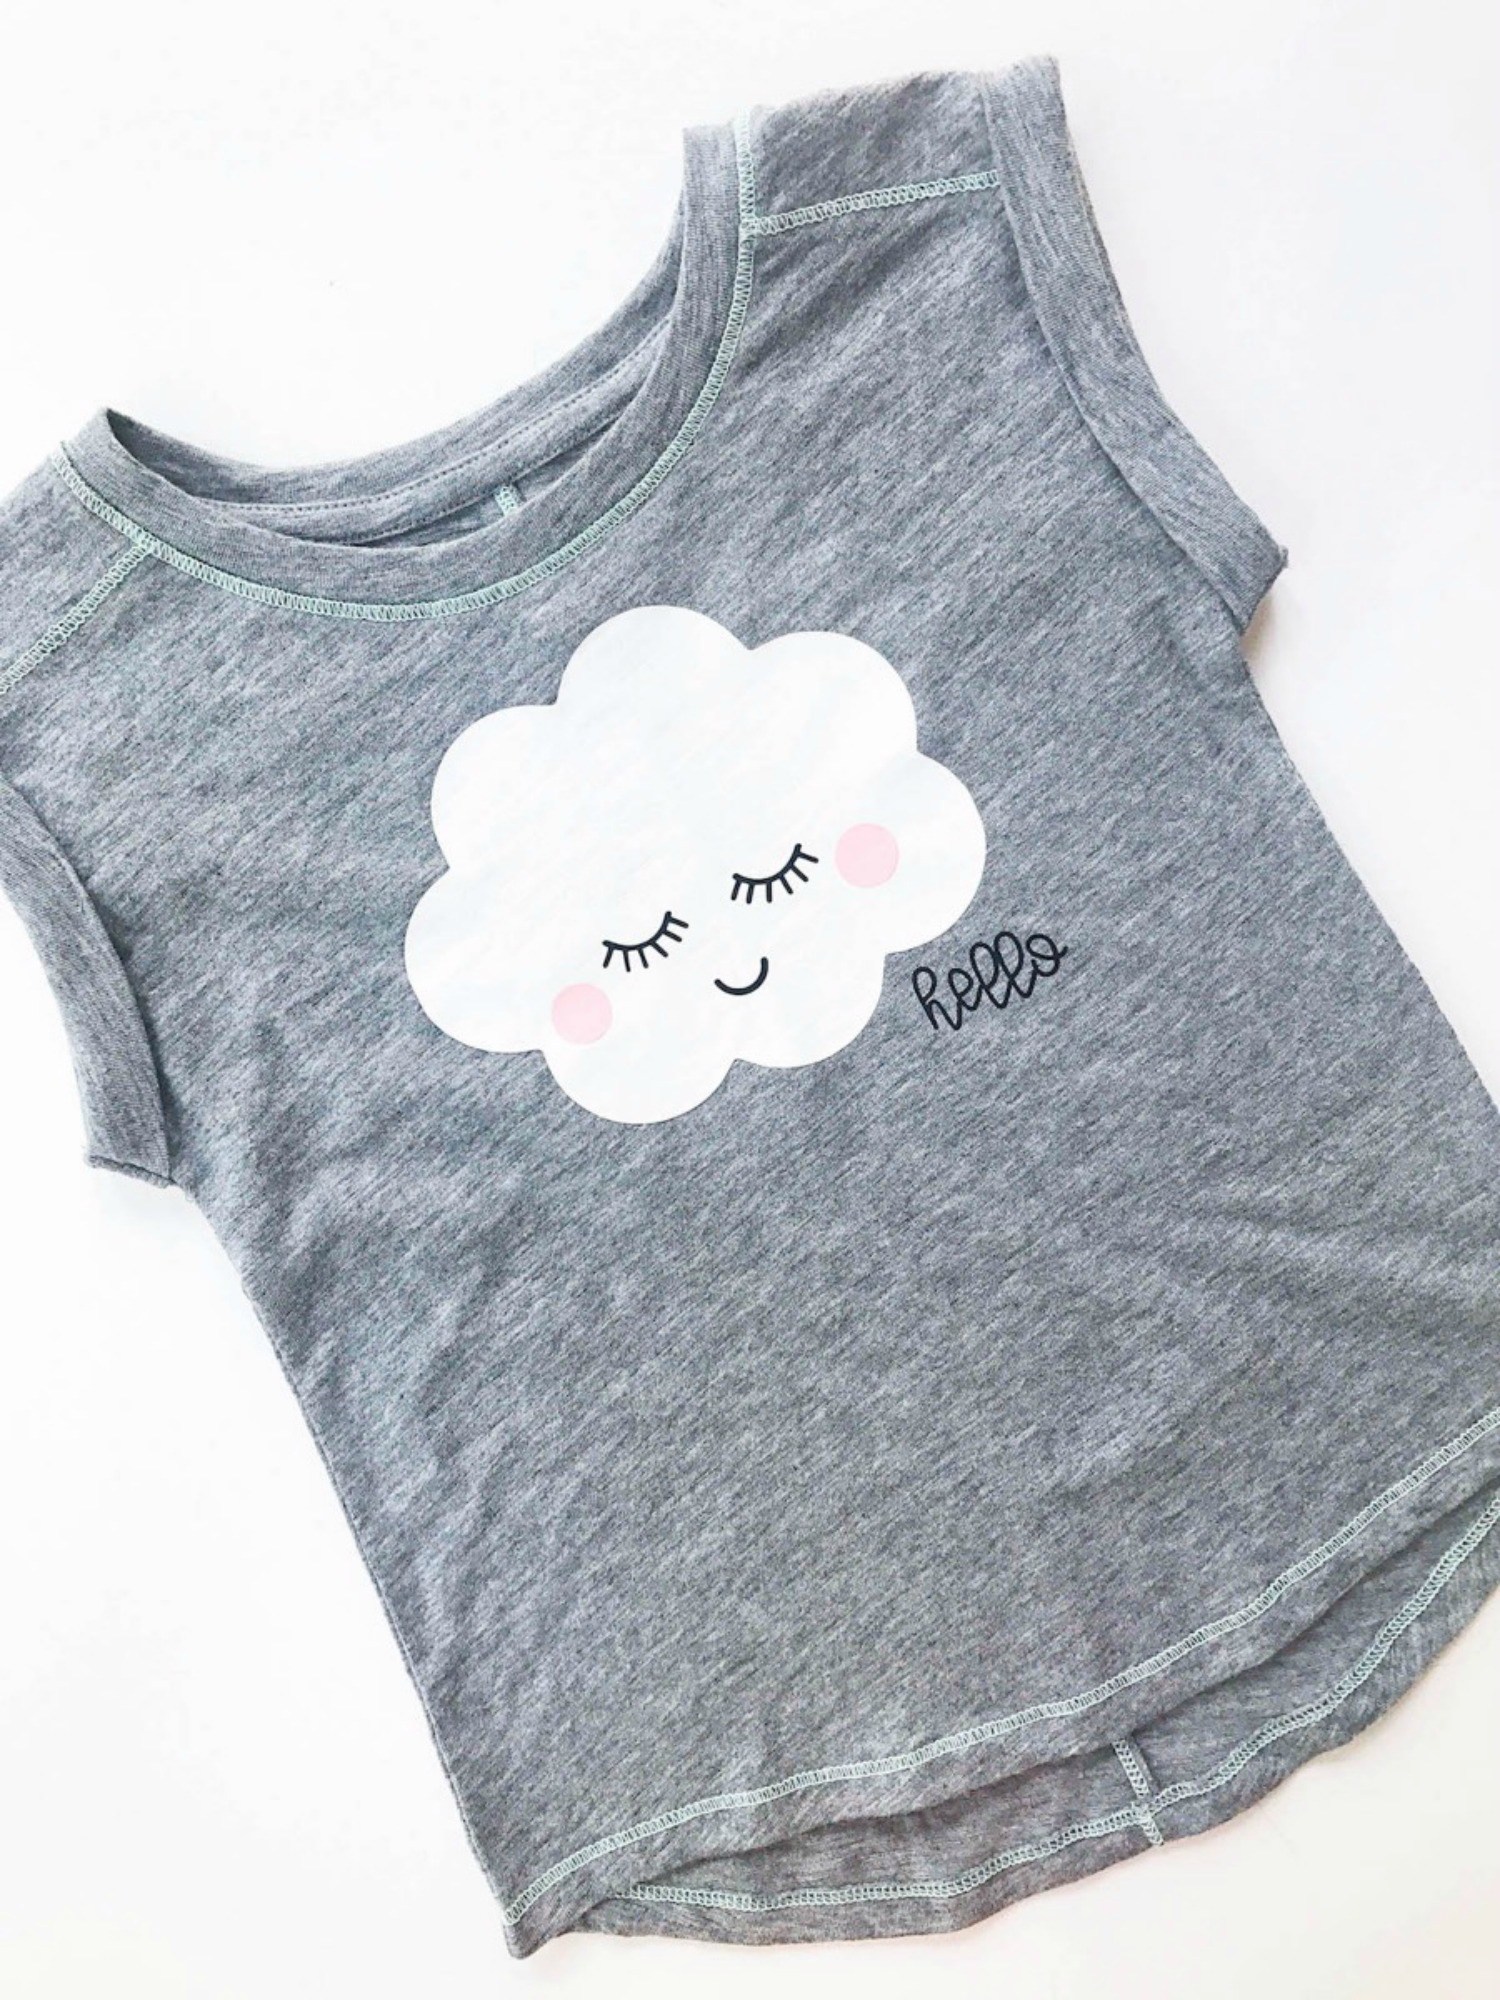 Download Cloud shirt with layered heat transfer vinyl - Expressions ...